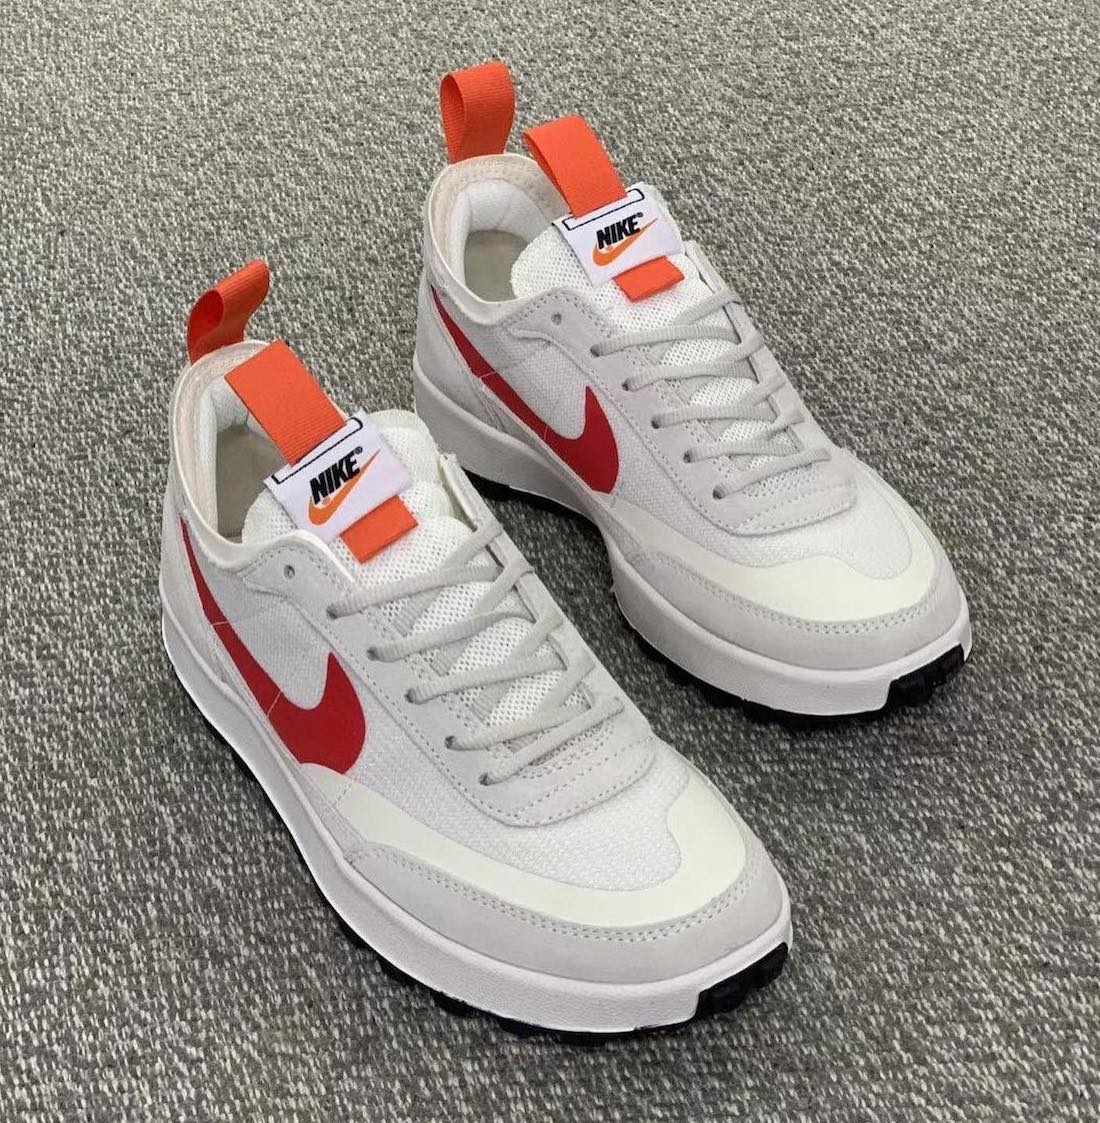 Tom Sachs NikeCraft General Purpose Shoe White Red Release Date